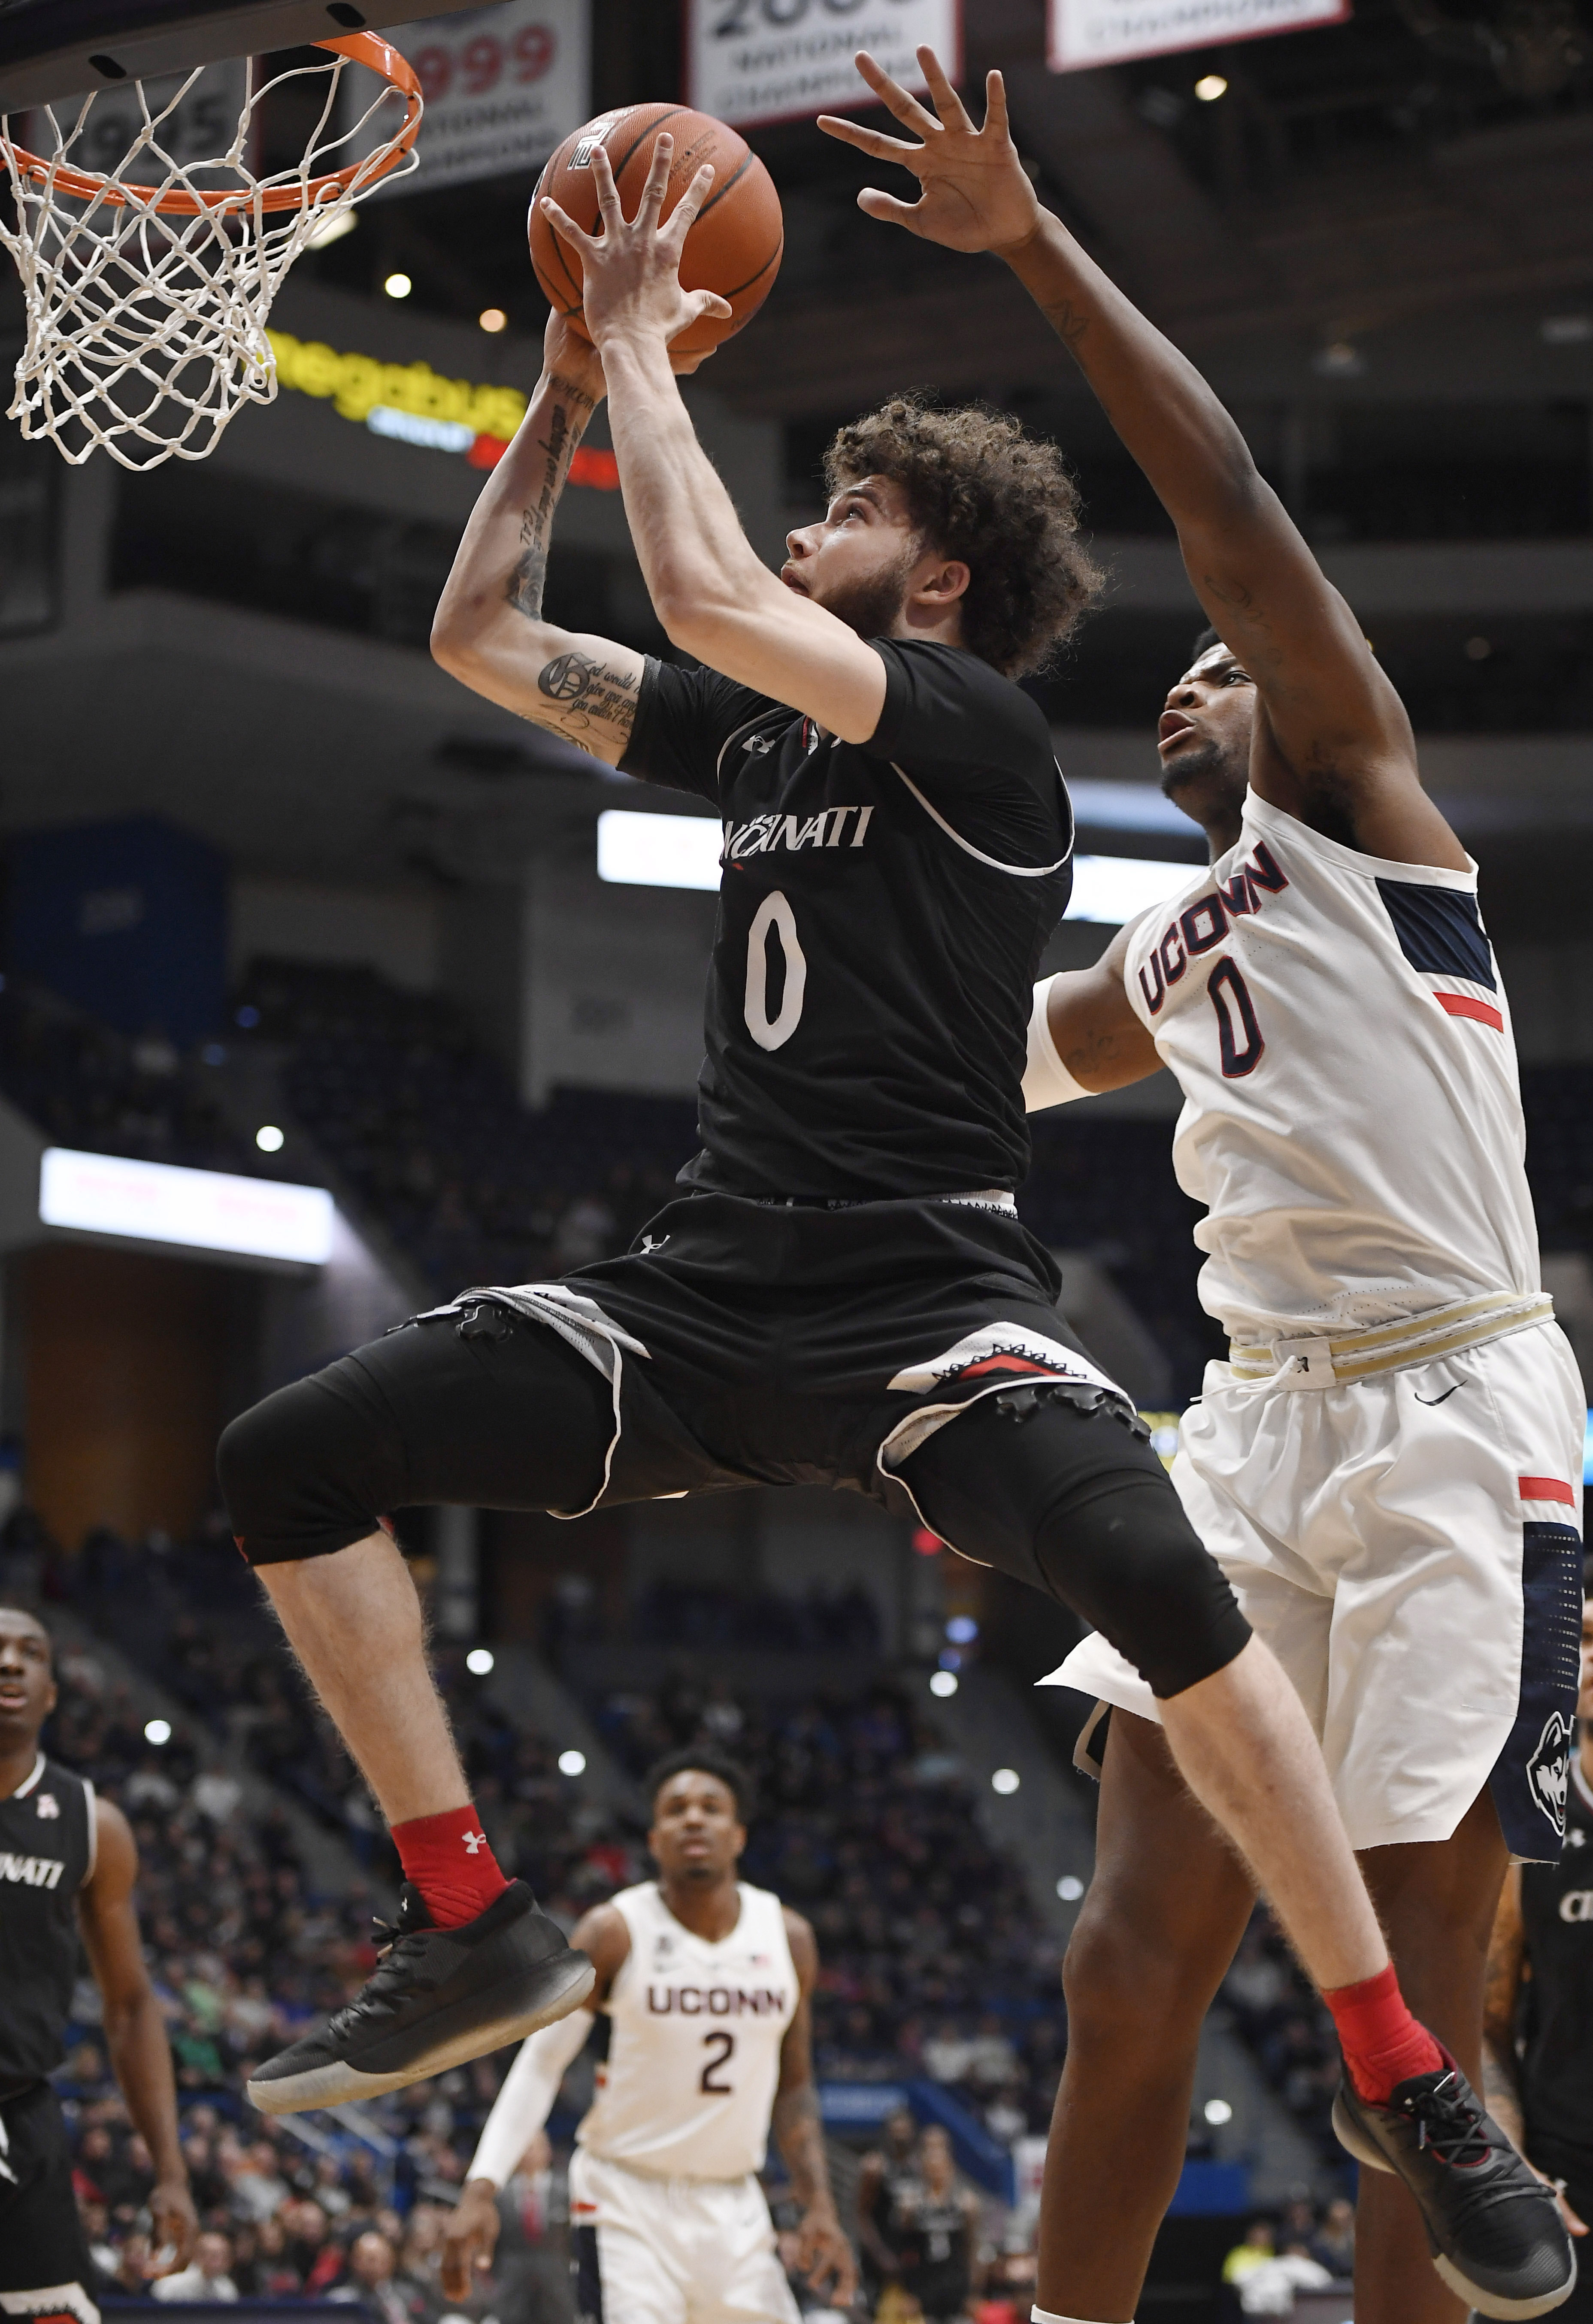 Cincinnati holds off UConn 64-60 to keep pace in AAC race